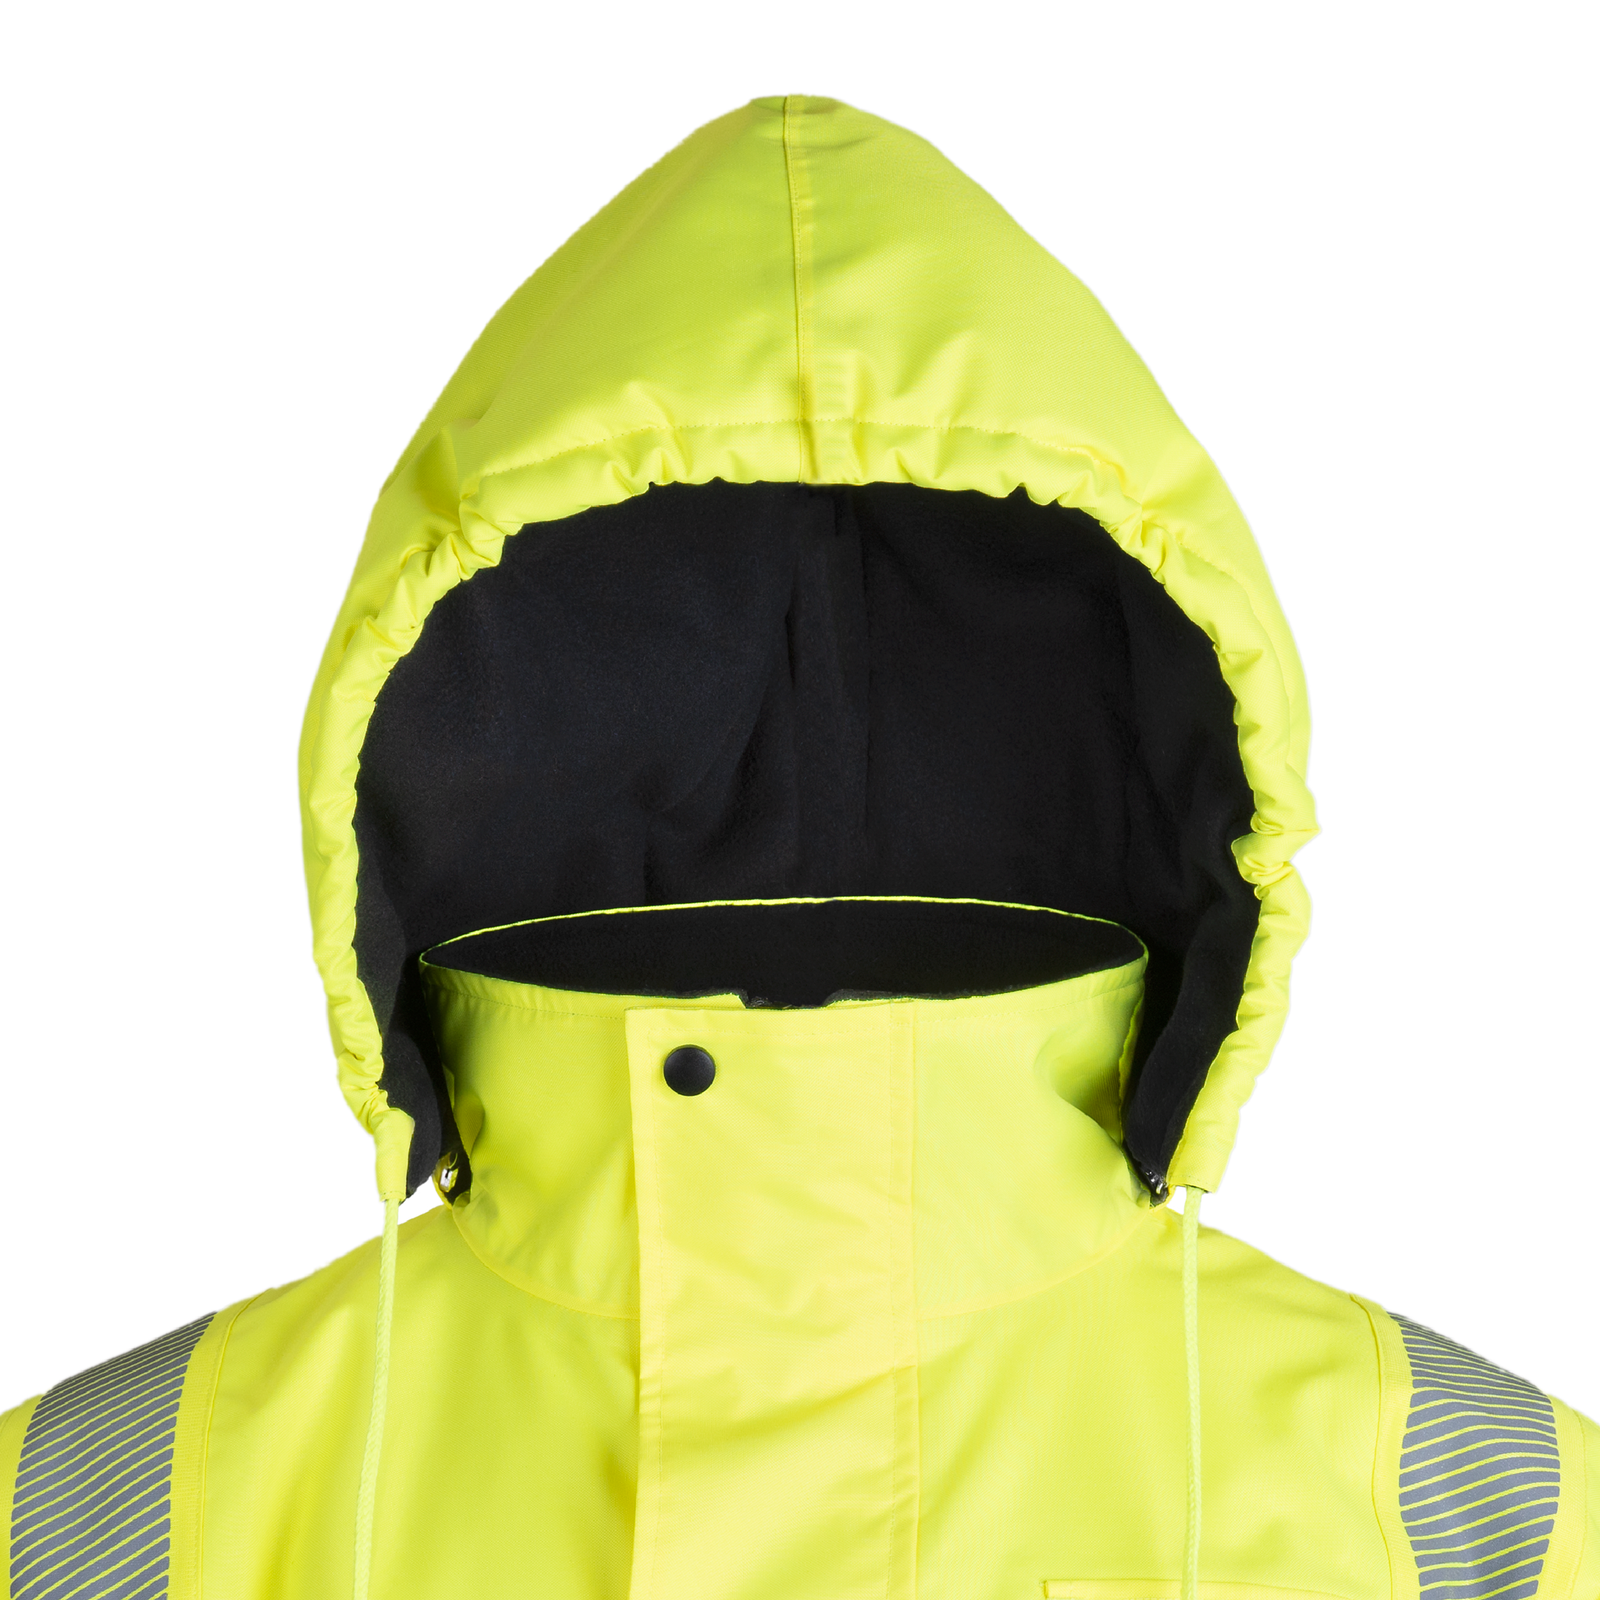 View yellow and black Hi-vis safety jacket with fleece liner, heat transfer reflective tapes, removable hoodie and pockets. 